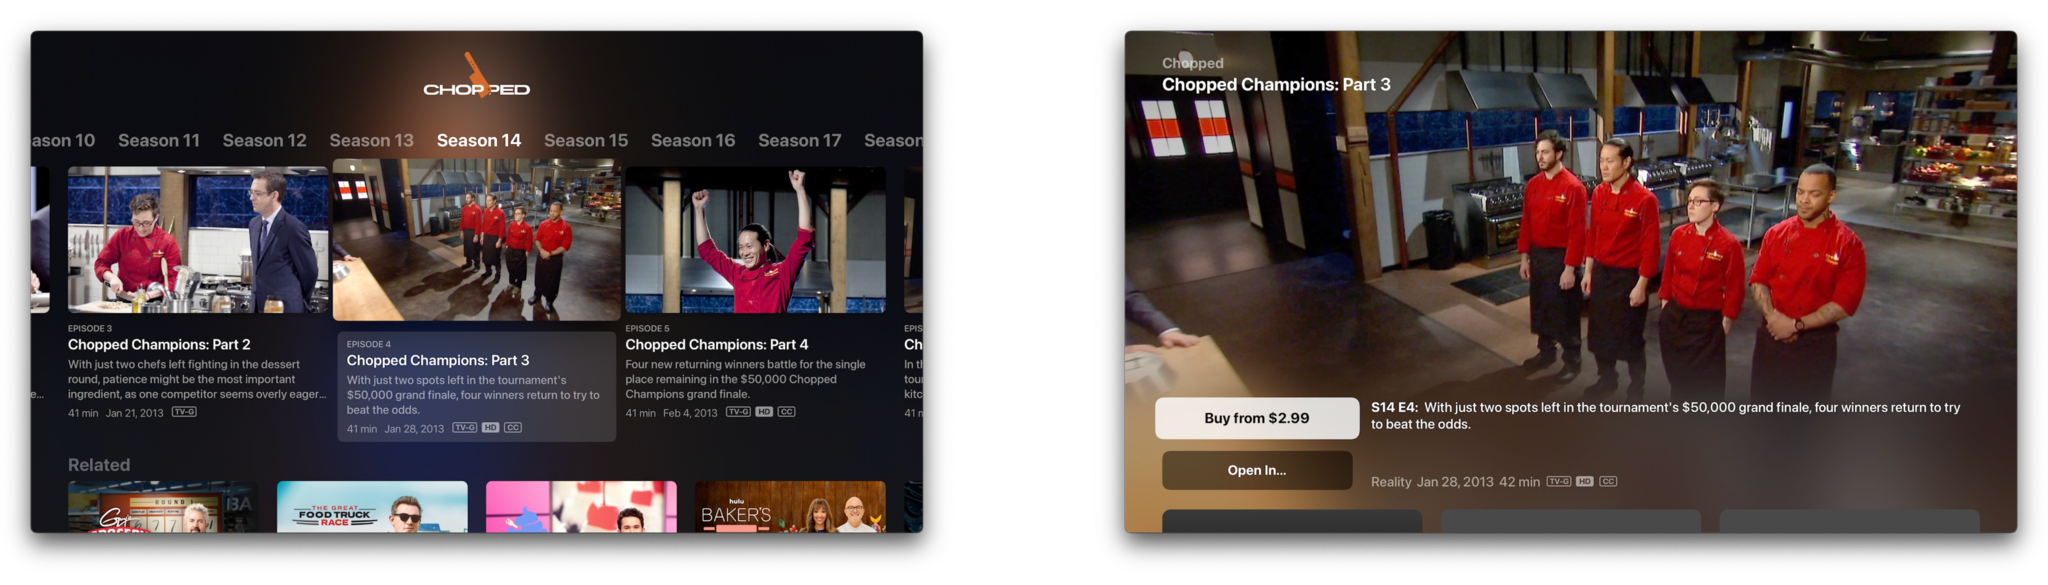 How to buy TV shows in the Apple TV app on Apple TV by showing steps: Click on an available episode, Click Buy from $2.99